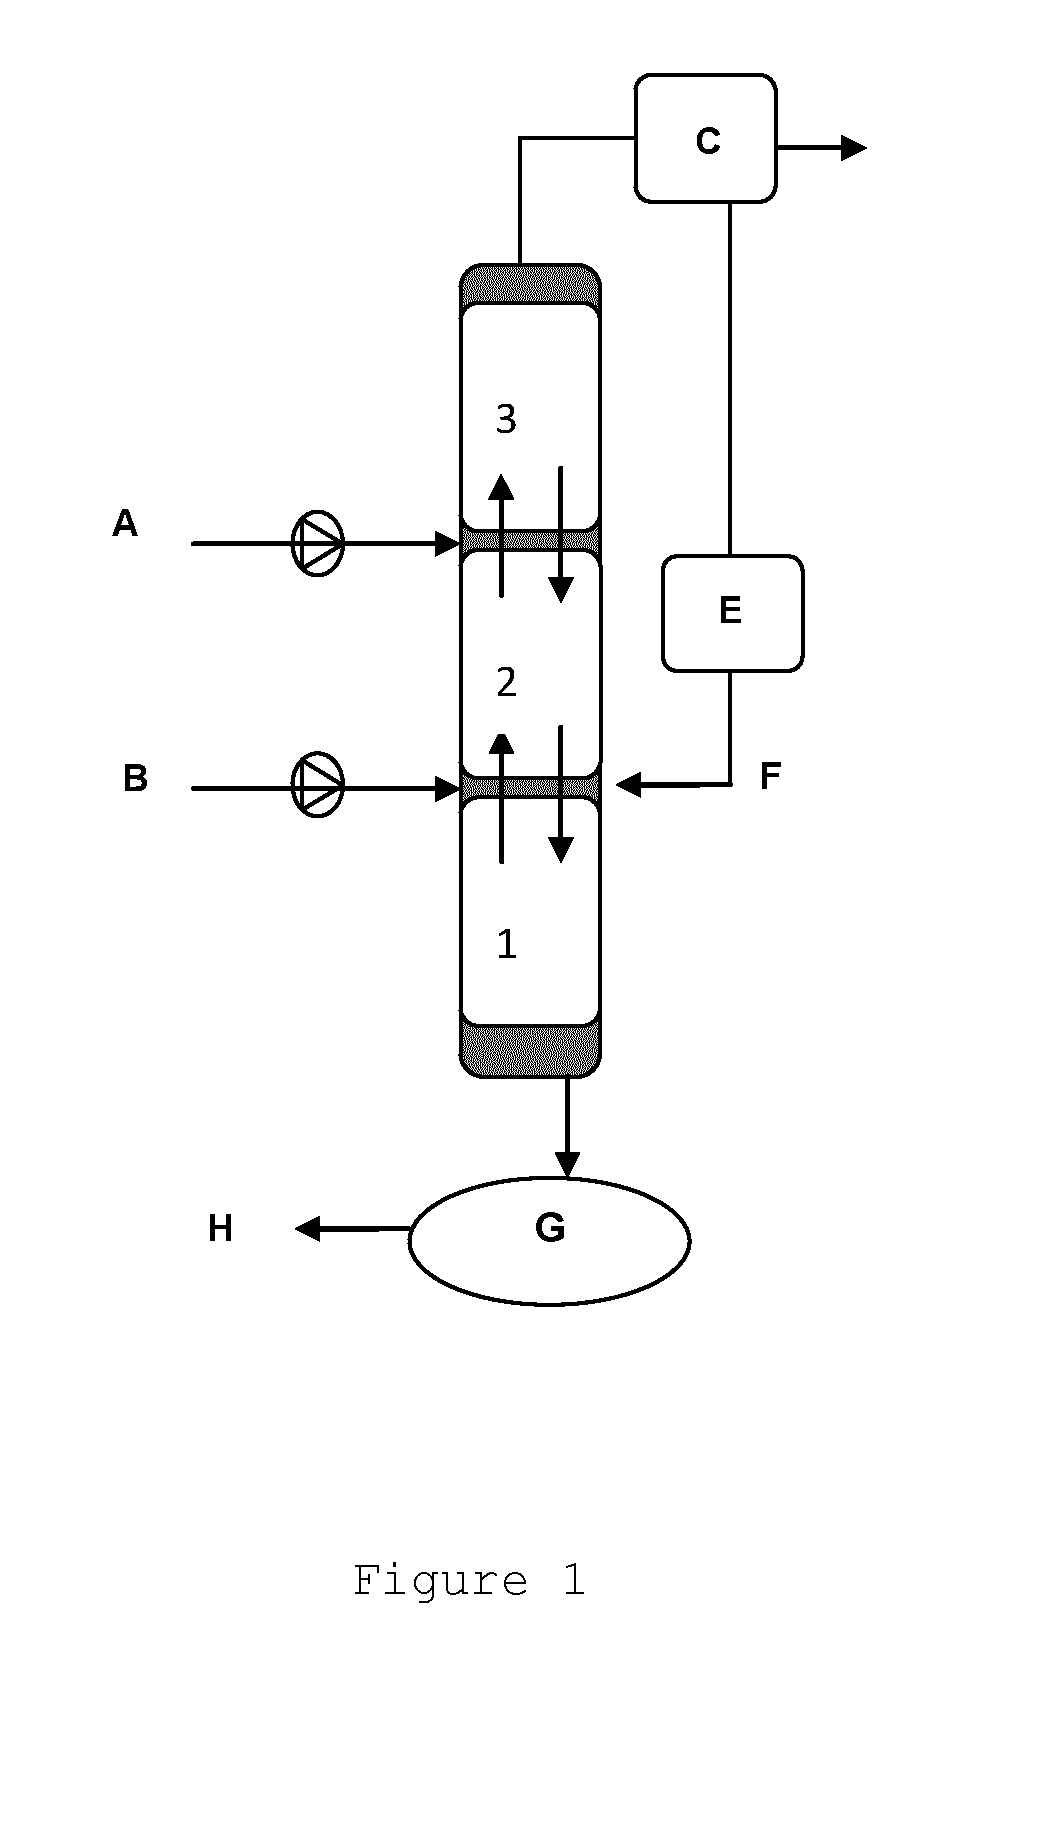 Process for producing a lactic ester from a fermentation liquor containing ammonium lactate